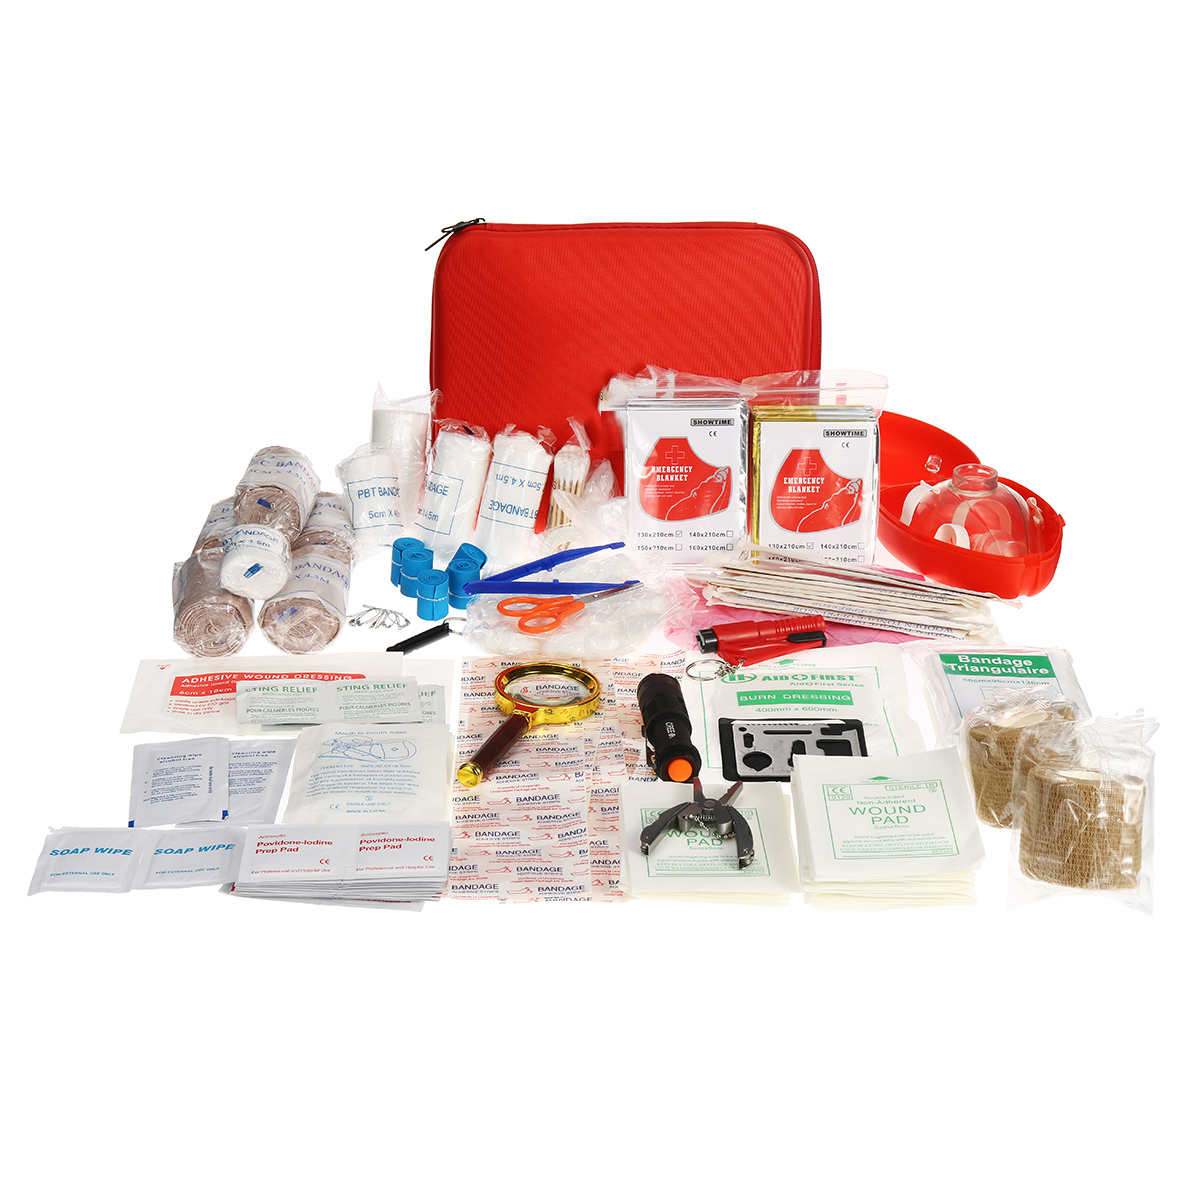 249Pcs-34Types-SOS-Survival-Equipment-First-Aid-Kit-Wound-Treatment-Tools-For-Outdoor-Activities-Cam-1639988-3